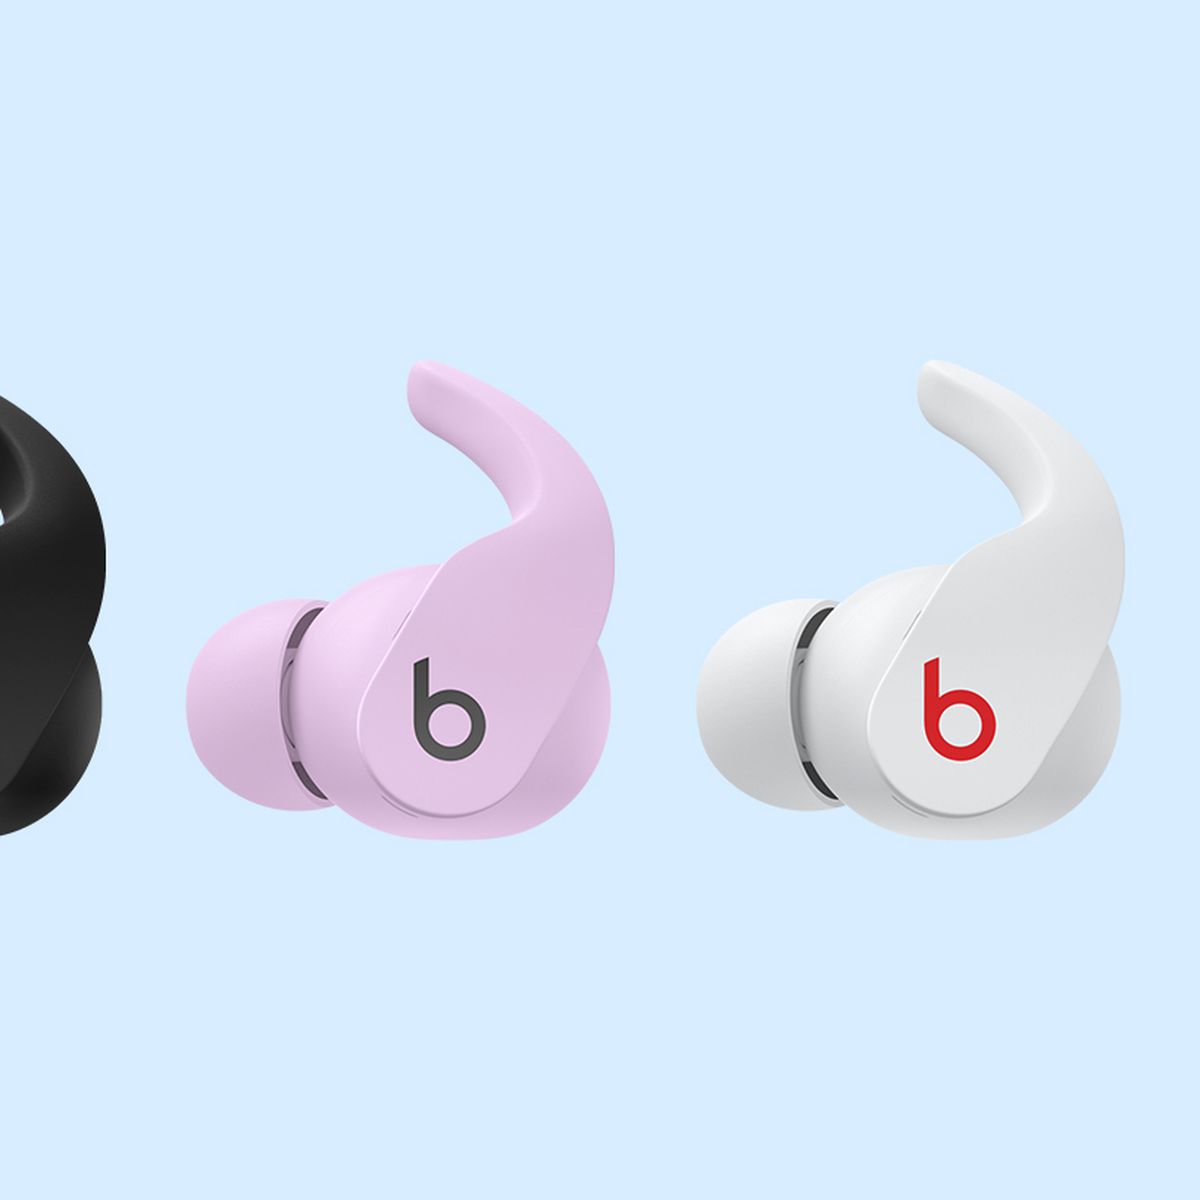 Apple to launch new Beats Fit Pro fragment design edition on July 7 -  PhoneArena